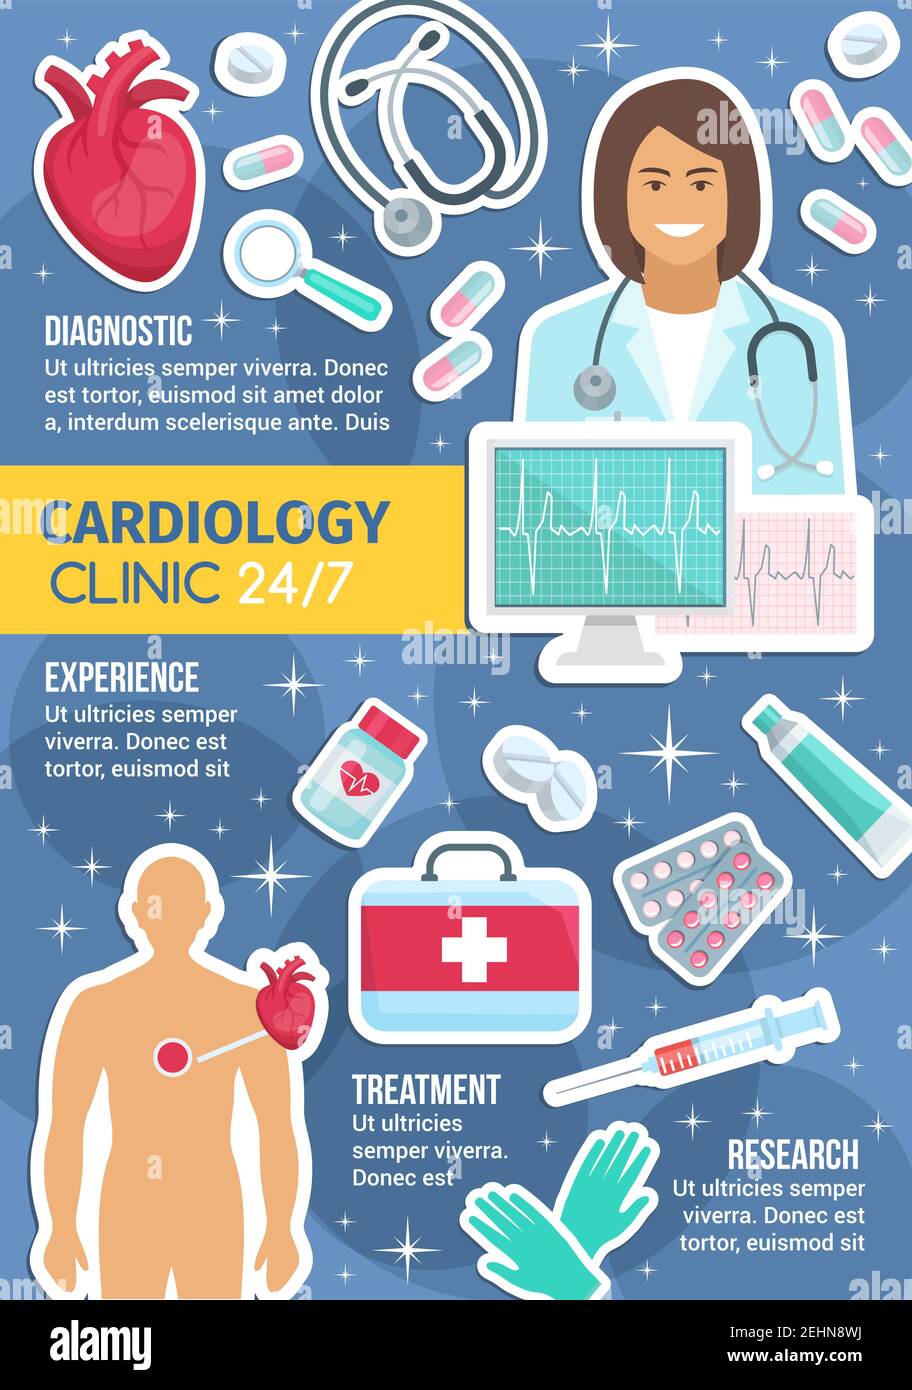 Cardiology clinic and everyday service. Vector cardiologist doctor with heart pulse on cardiogram, cardio treatment pills or first aid kit, human hear Stock Vector